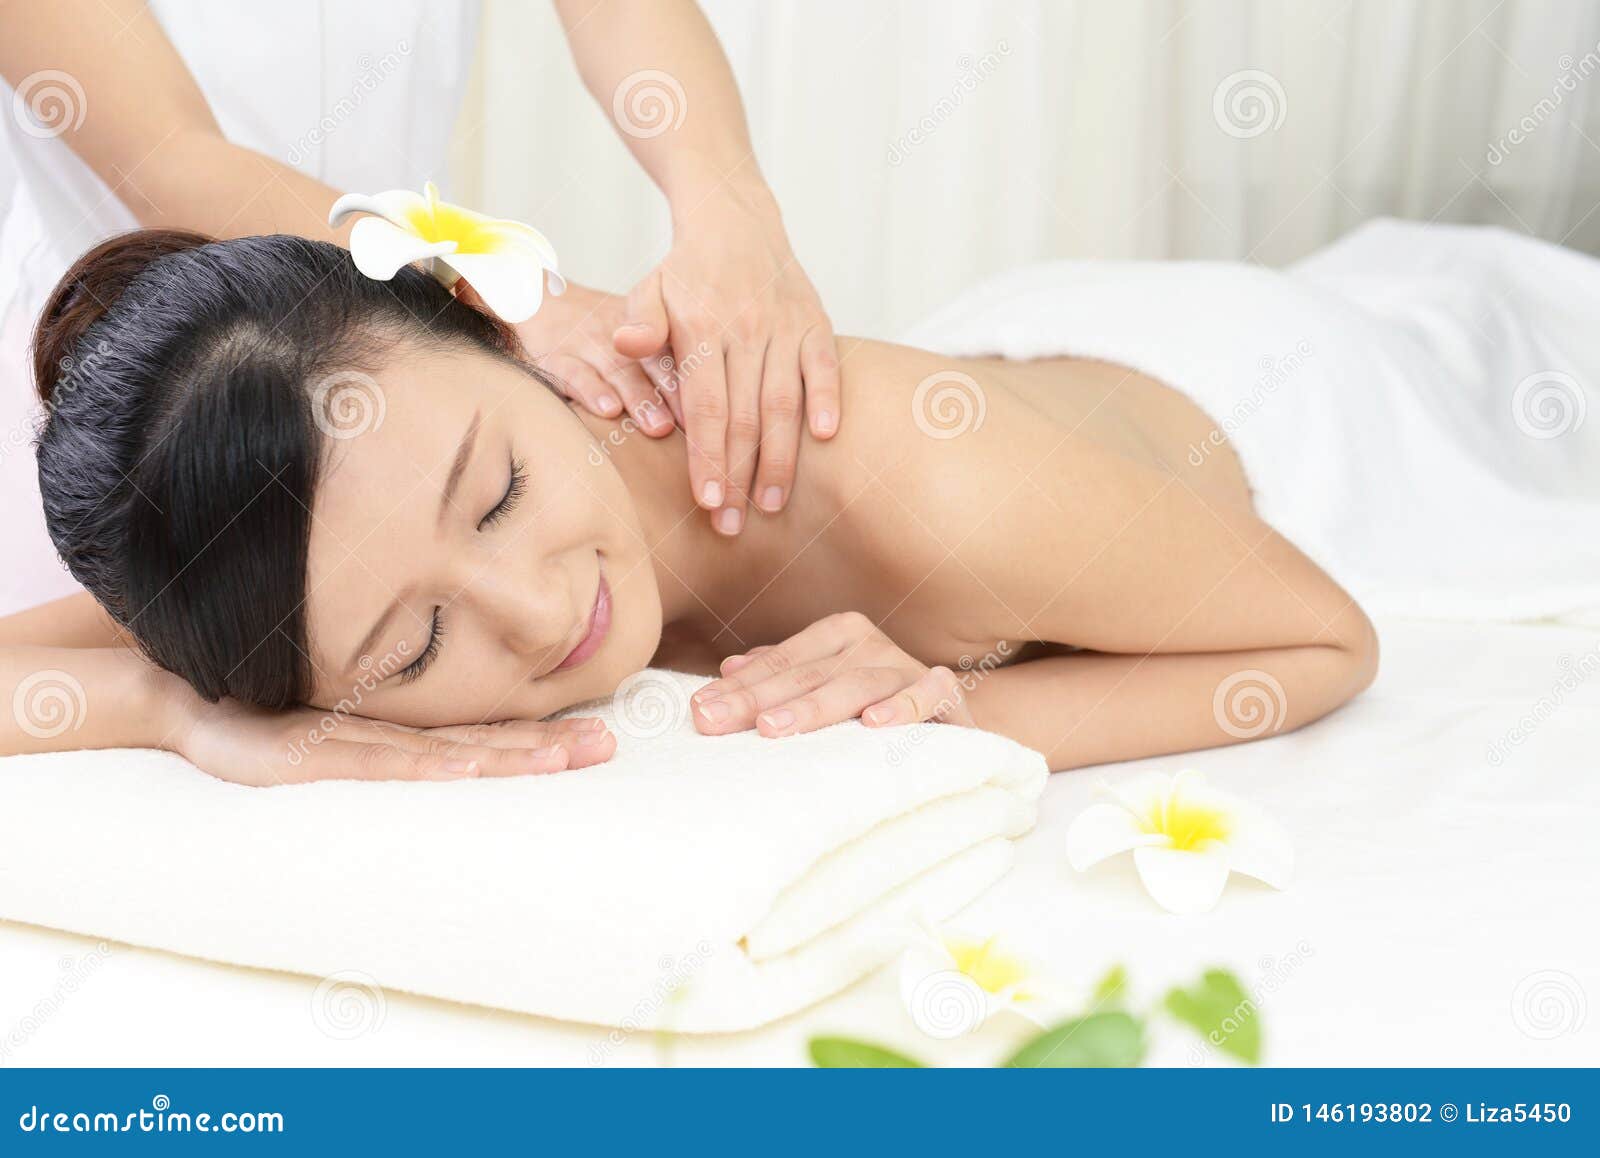 Japanese massage oil therapy